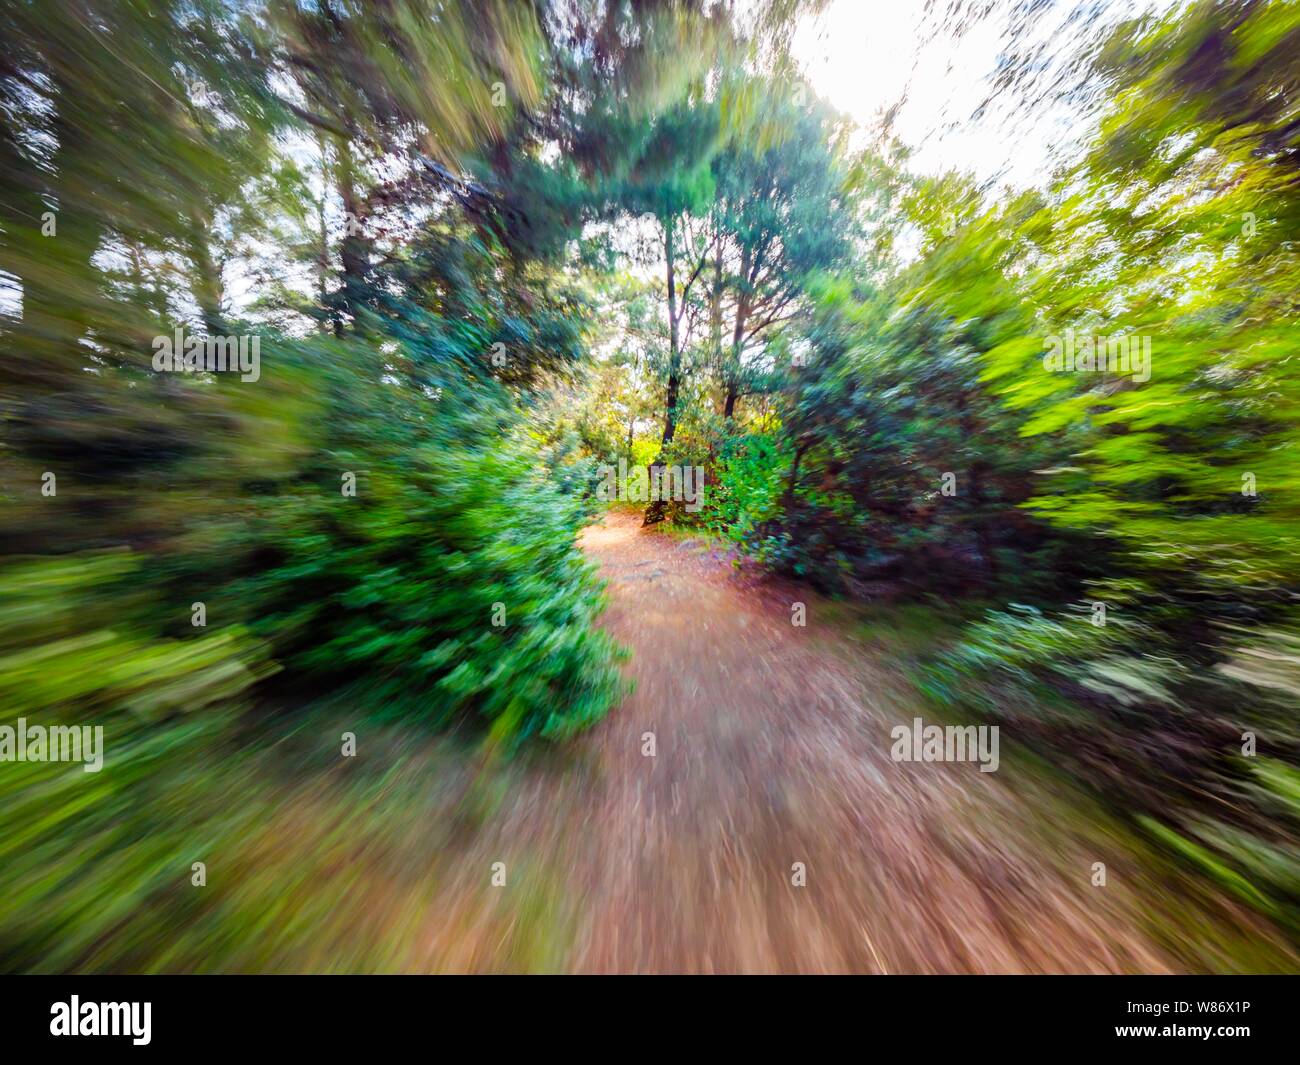 Green forest countryside path pathway natural environment speeding through dense trees Stock Photo